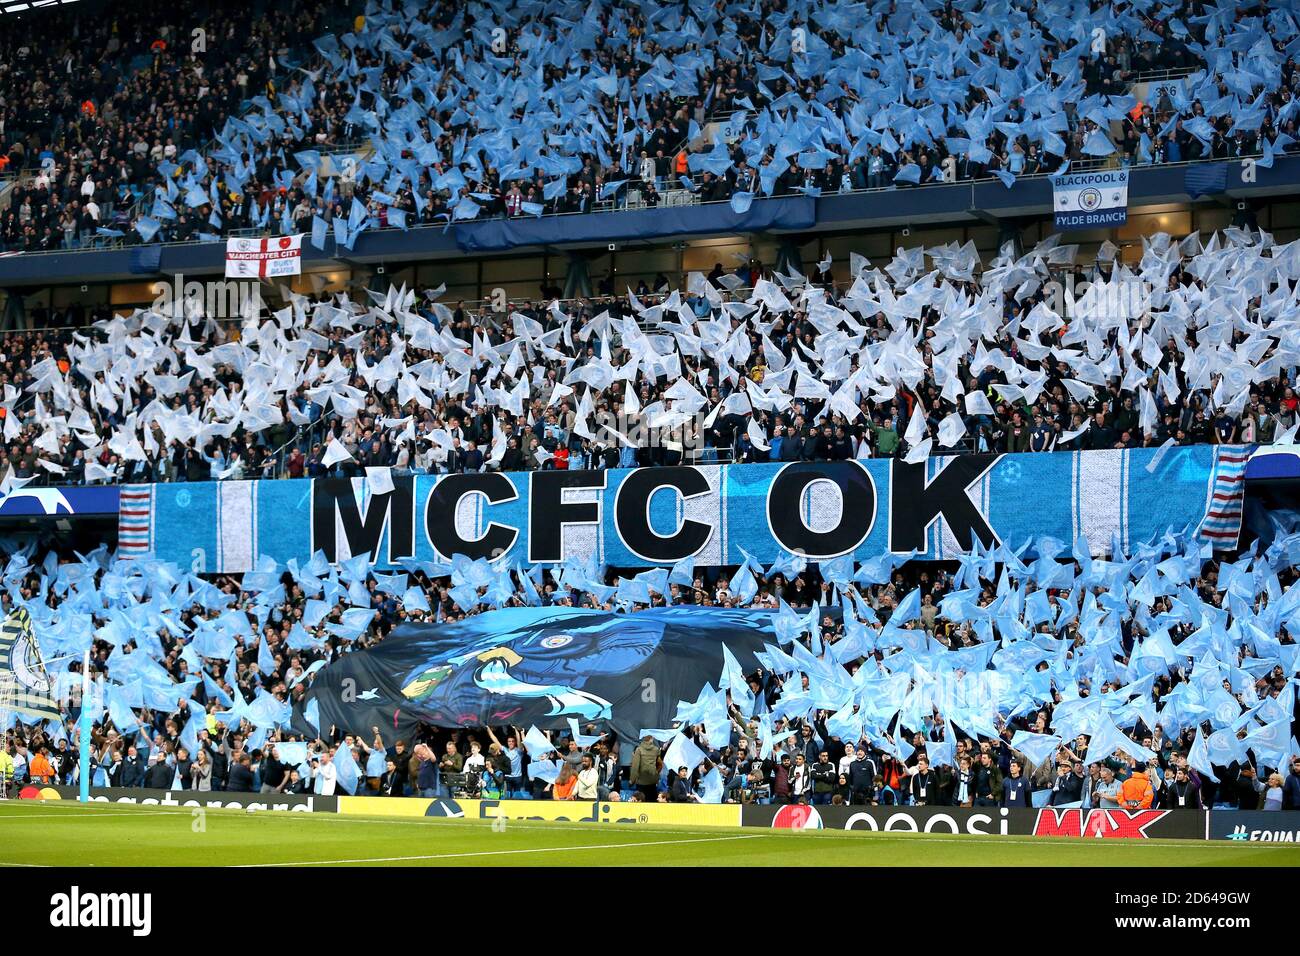 Manchester City fans wave flags ahead of kick-off near a banner that reads 'MCFC OK' Stock Photo